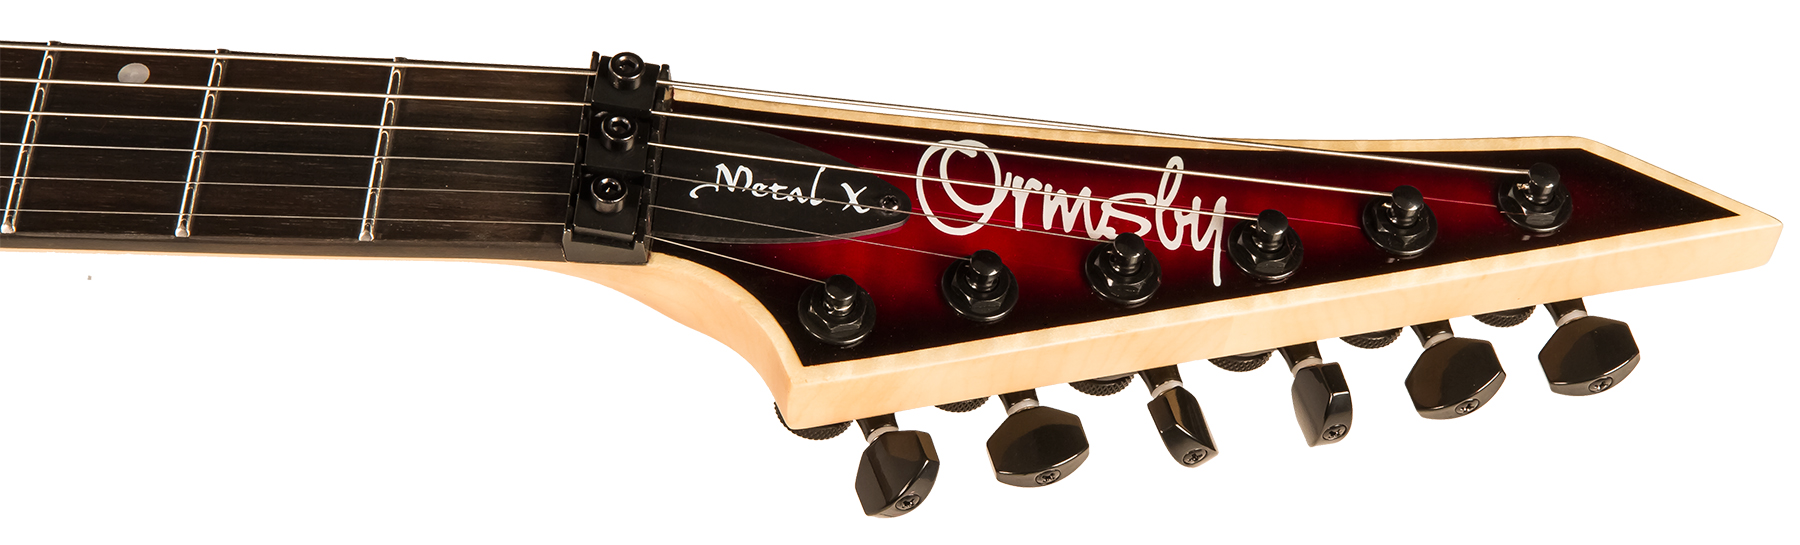 Ormsby Metal X 6 Hh Fr Eb - Red Dead - Guitarra electrica metalica - Variation 4